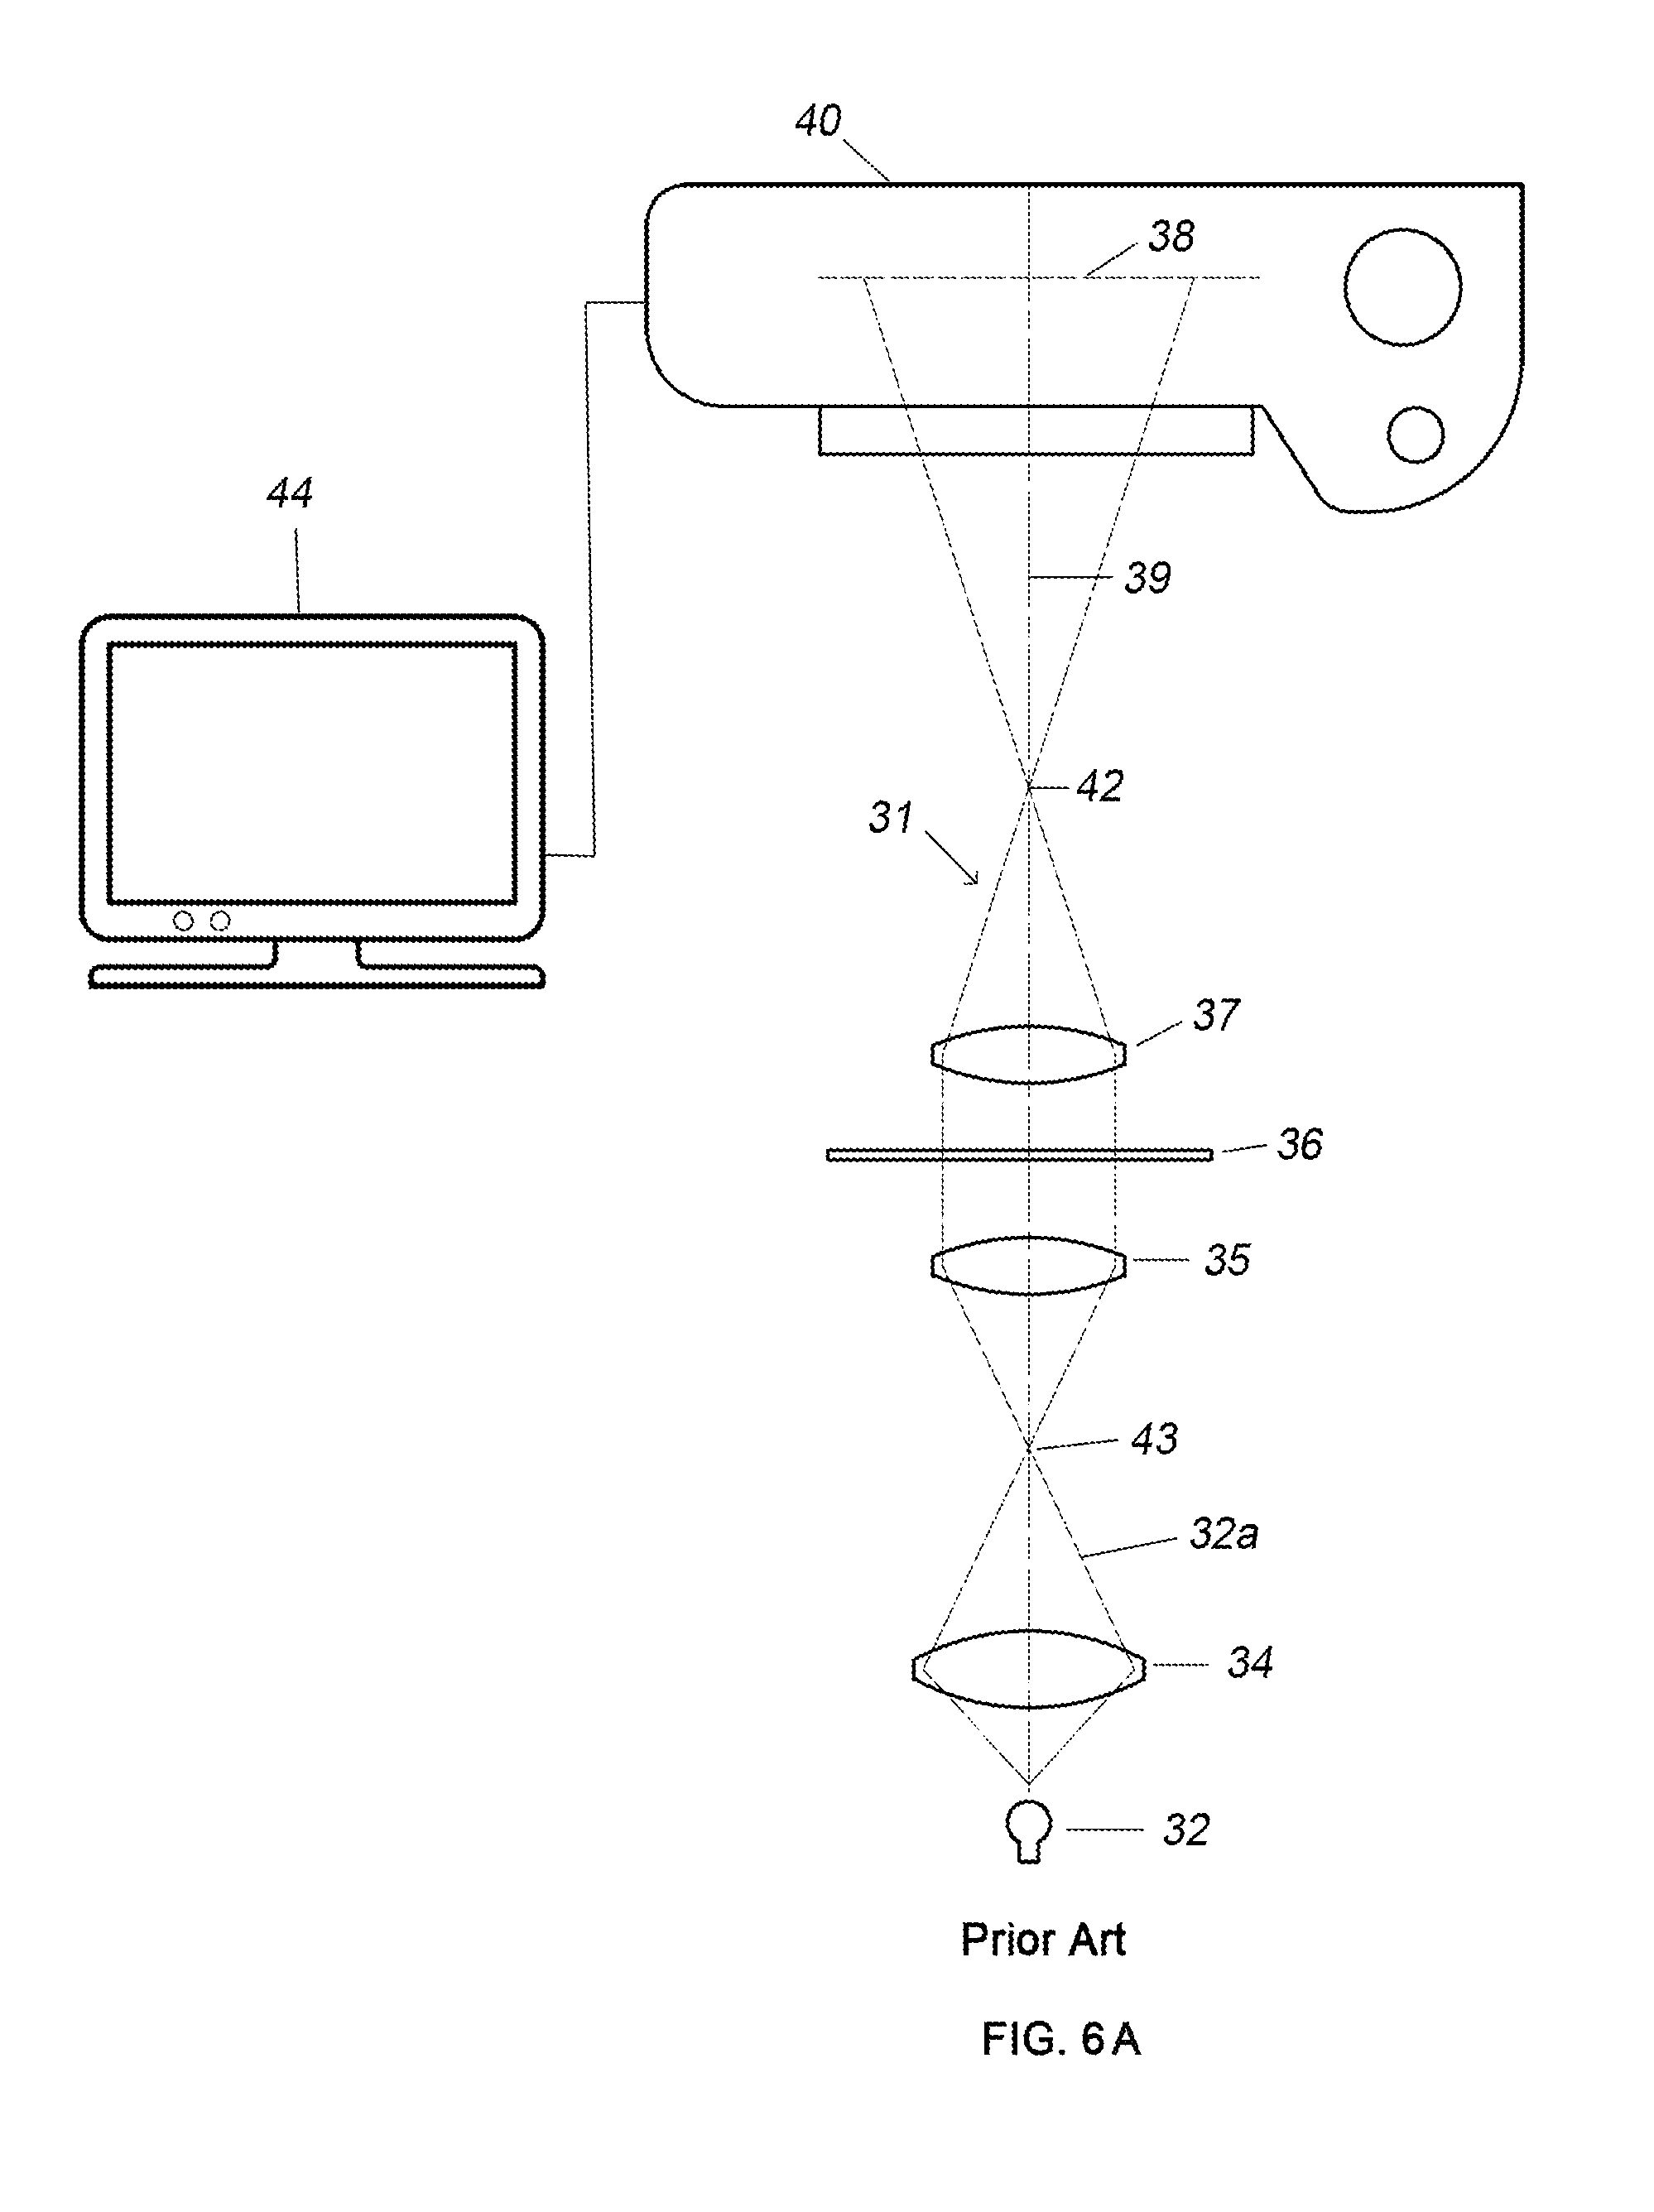 Method and Apparatus for Shaping Dynamic Light Beams to Produce 3D Perception in a Transmitted Light Microscope